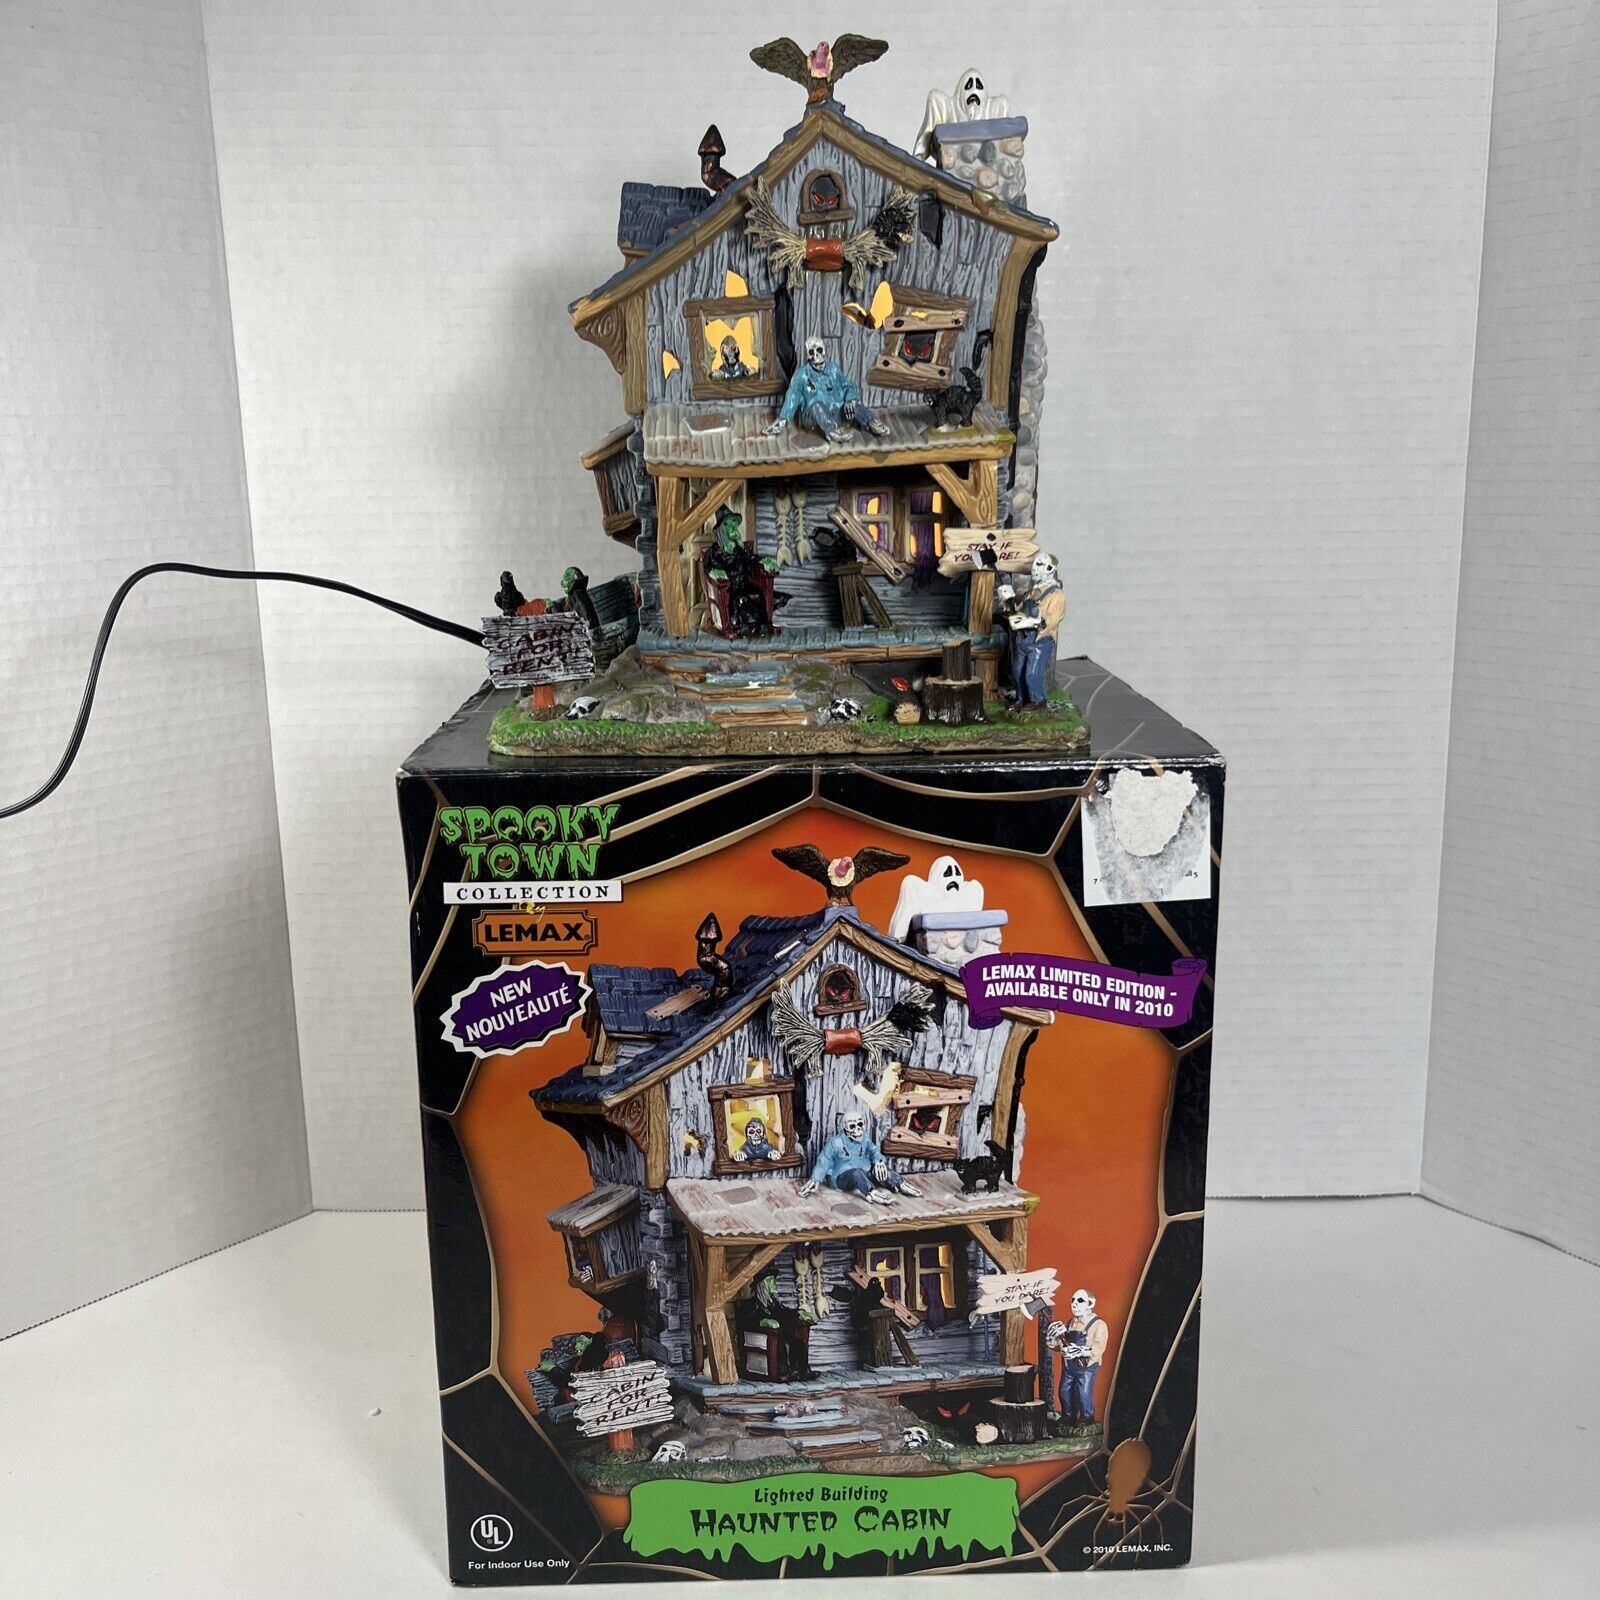 Lemax Spooky Town Haunted Cabin 2010 Limited Edition With Box EUC